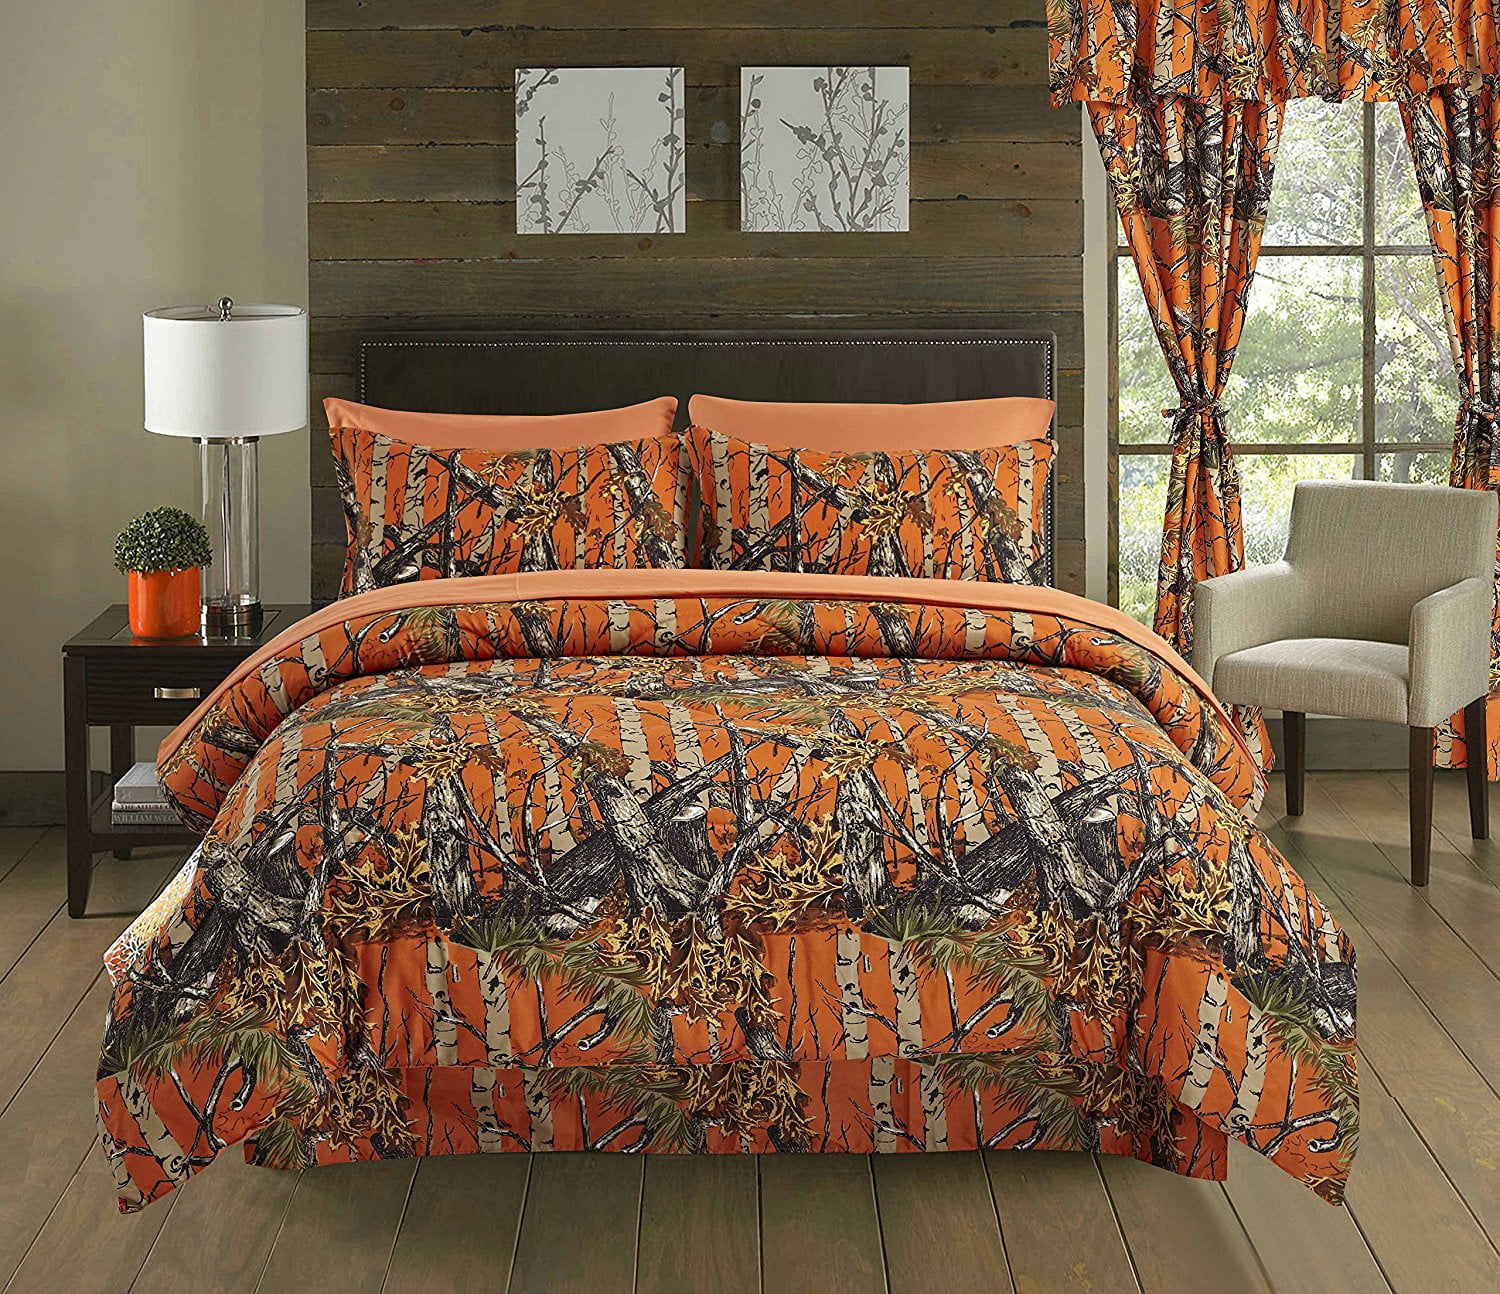 17 pc Natural Woods Camo Comforter with Sheets pillowcases and 2 curtain sets! 